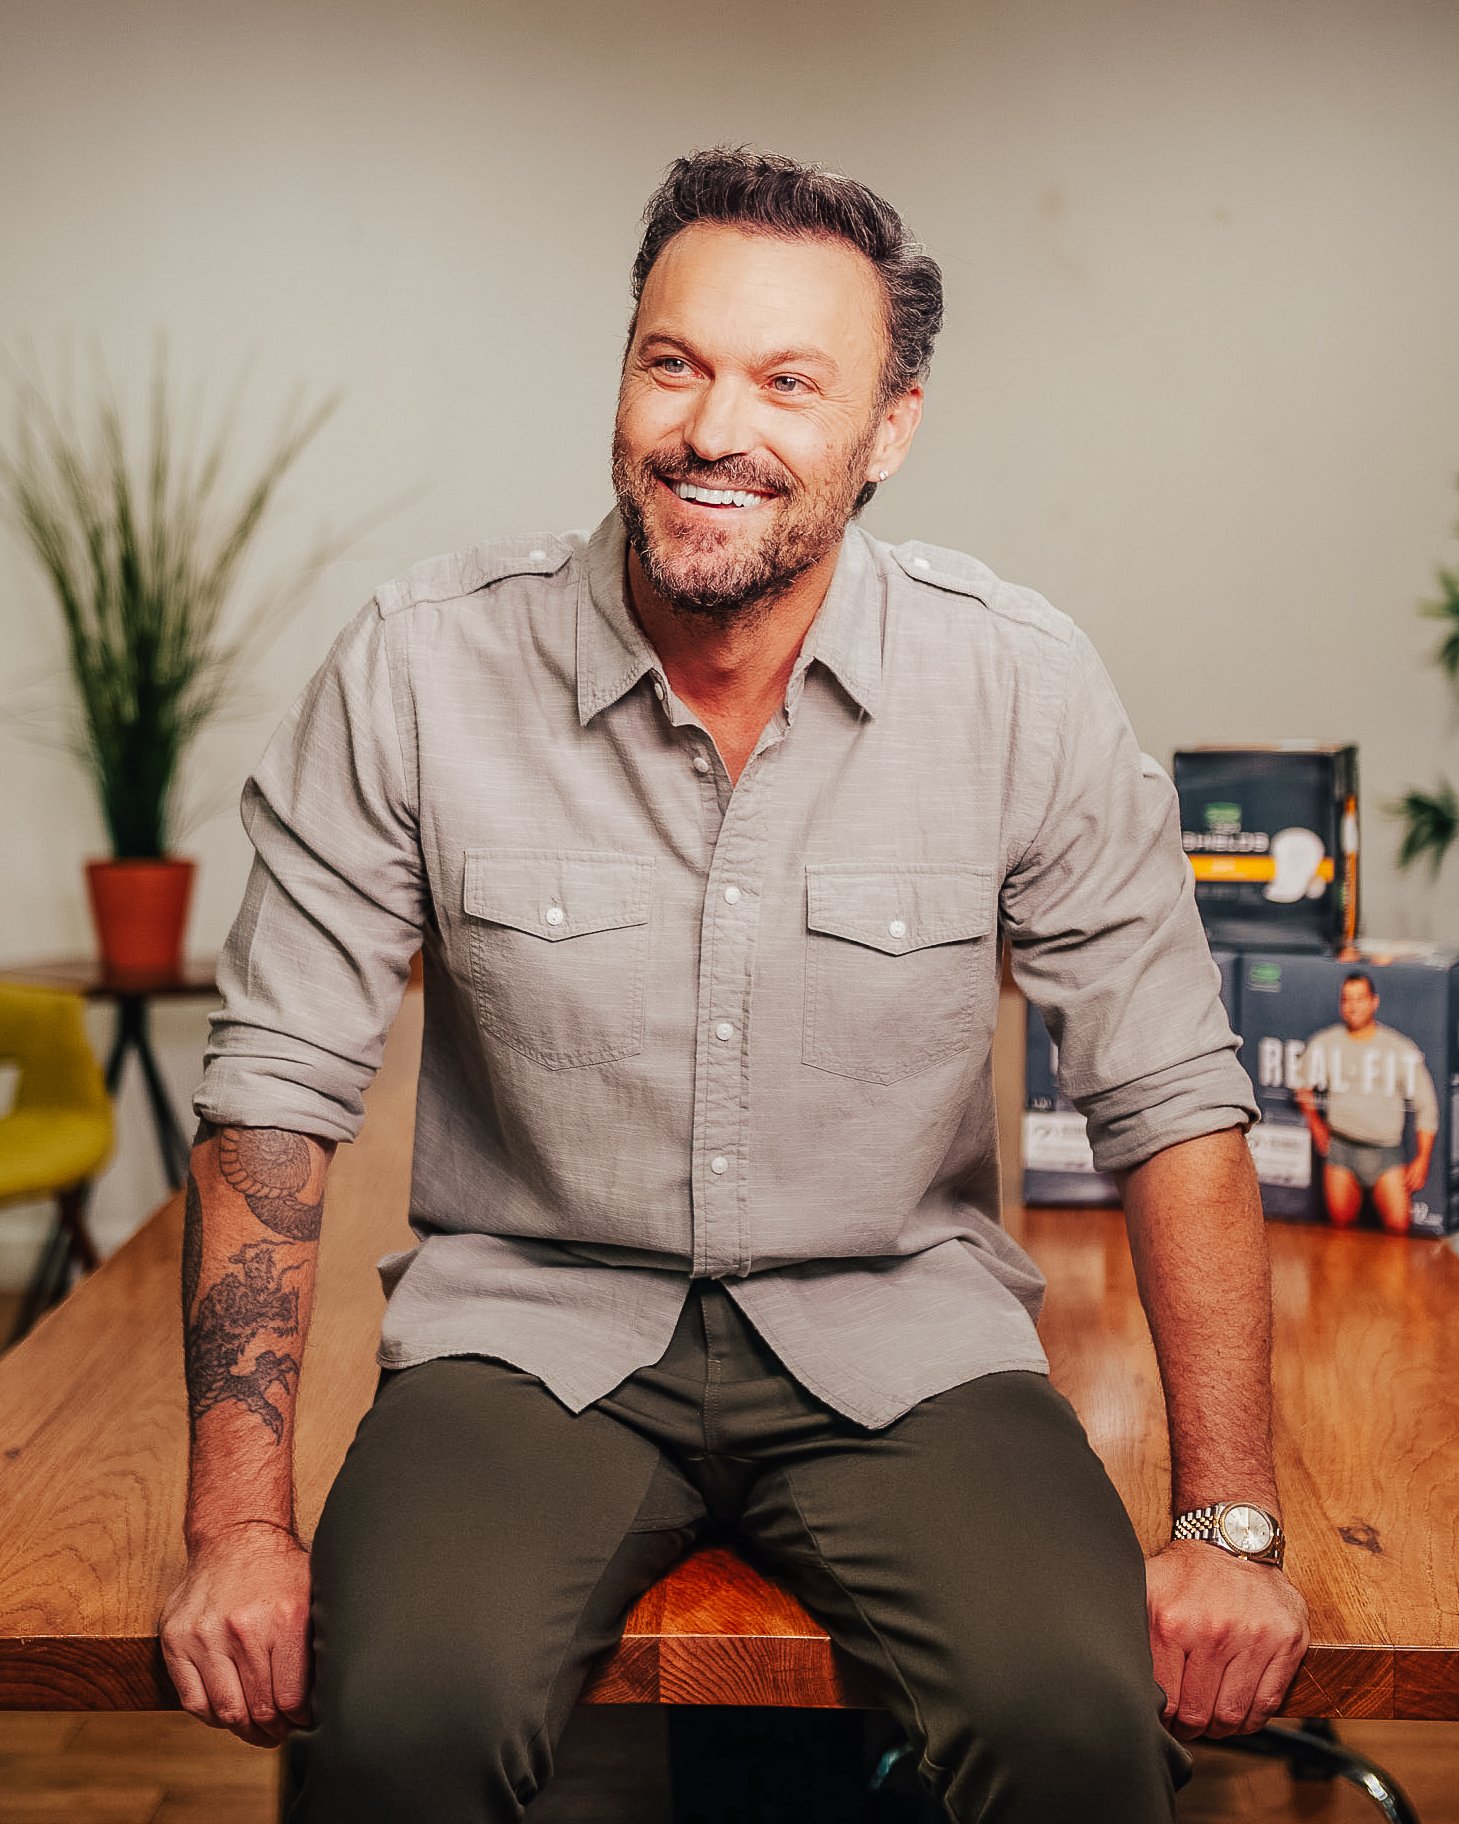 Brian Austin Green sits on the edge of a table and smiles